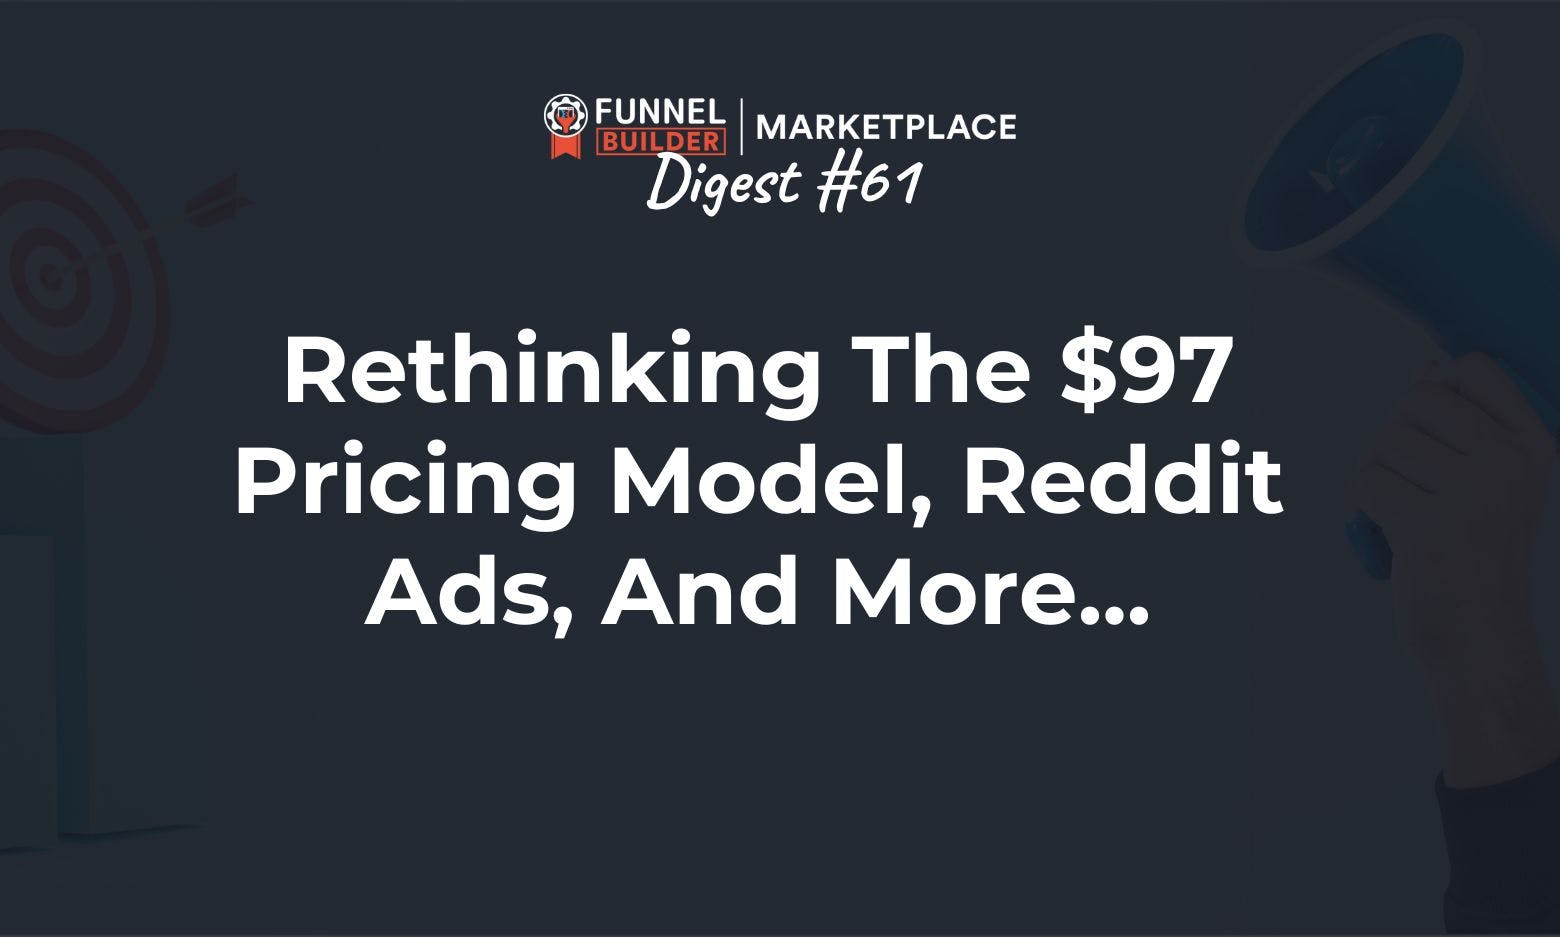 FBM Digest #61: Rethinking $97 pricing, Reddit ads, and more...